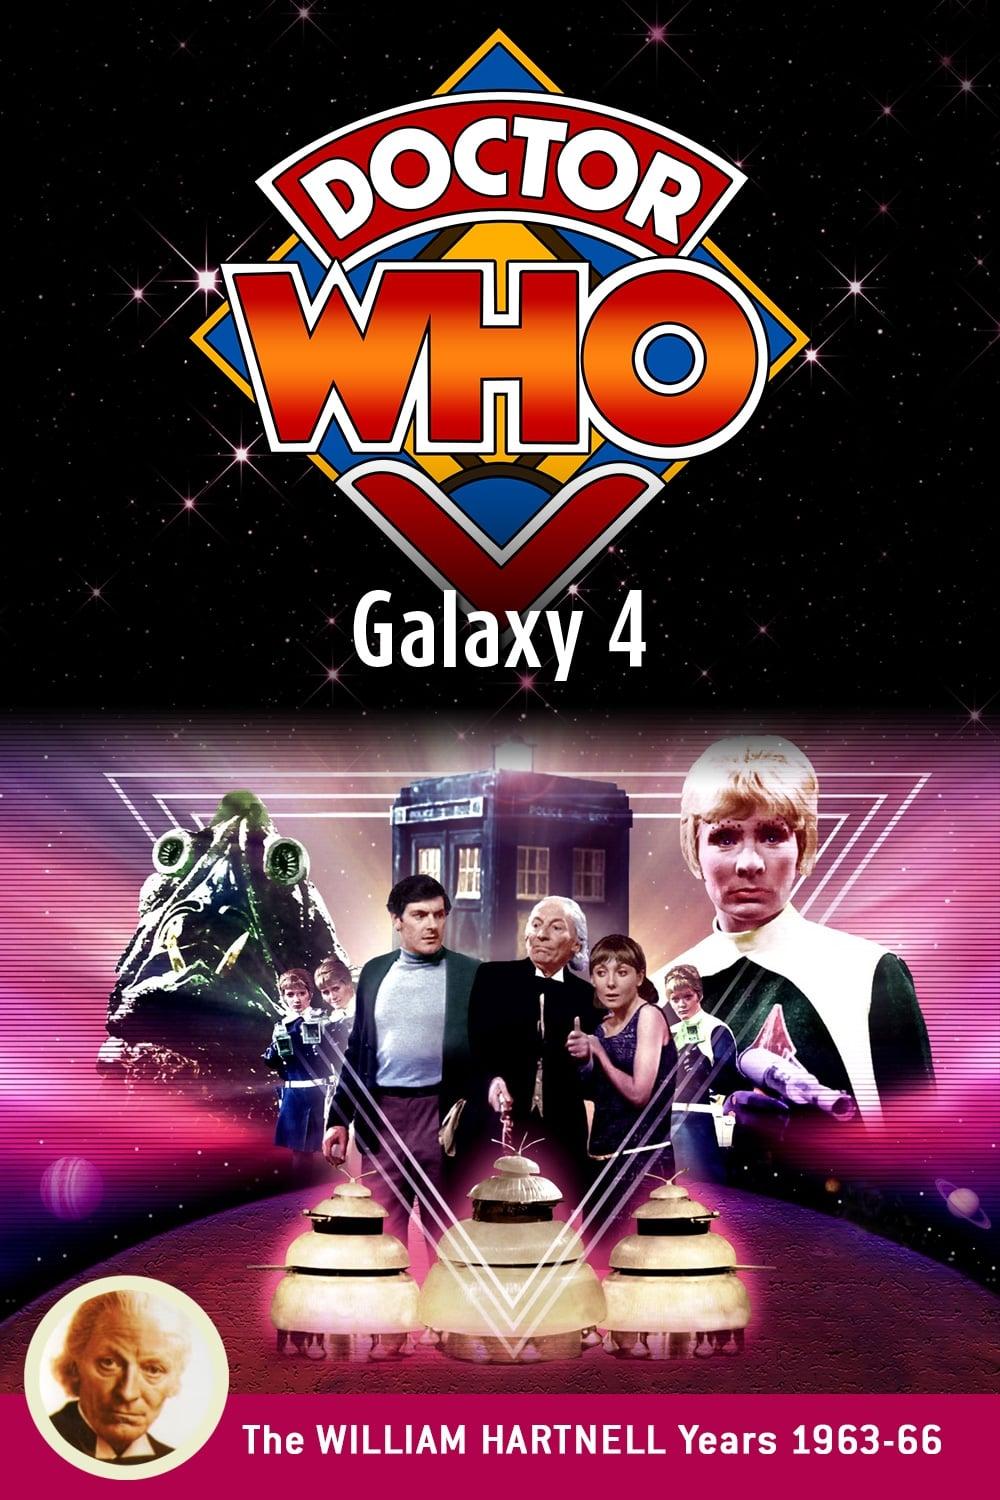 Doctor Who: Galaxy 4 poster